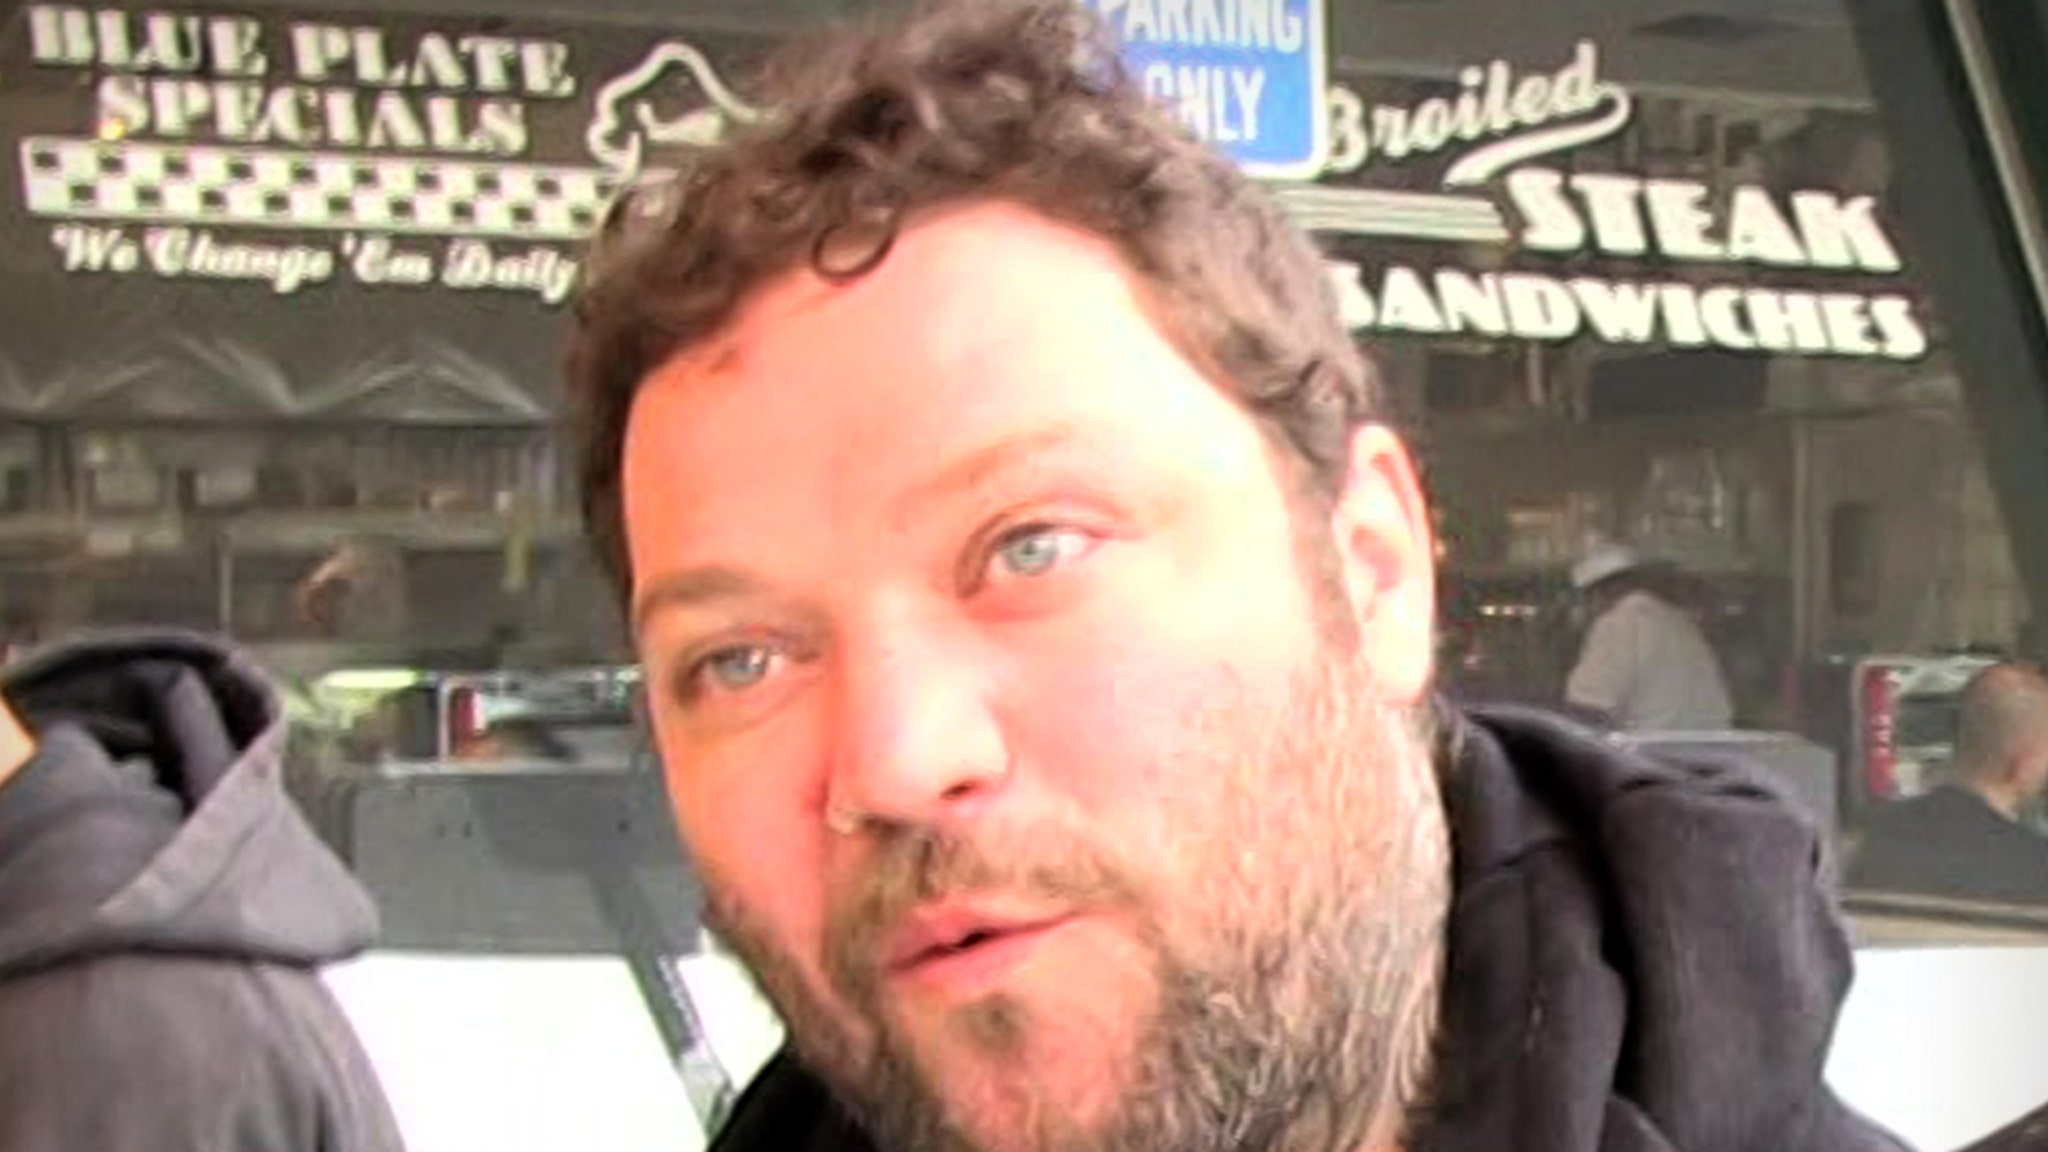 Bam Margera’s Bentley stolen, crashed into a house during police chase